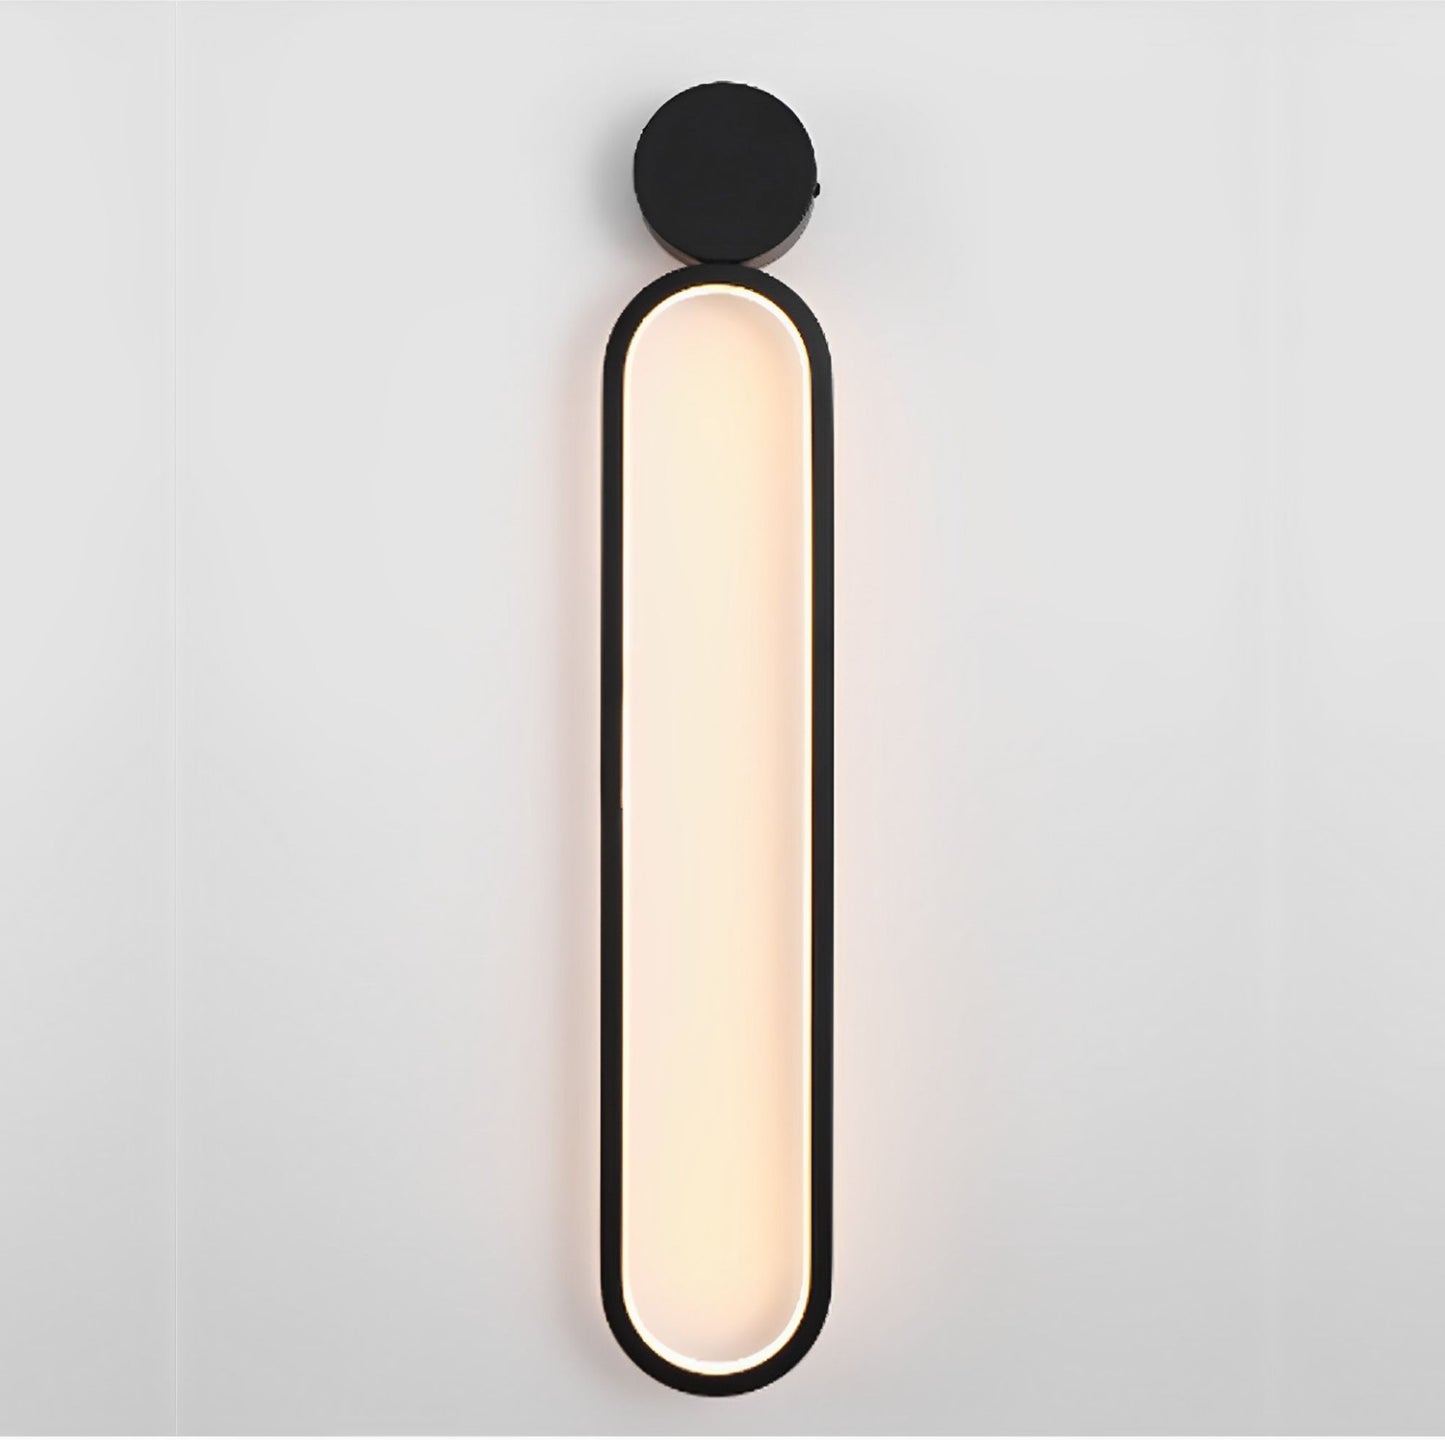 Load image into Gallery viewer, Modern Long LED Wall Lamp by Gloss (6802)
